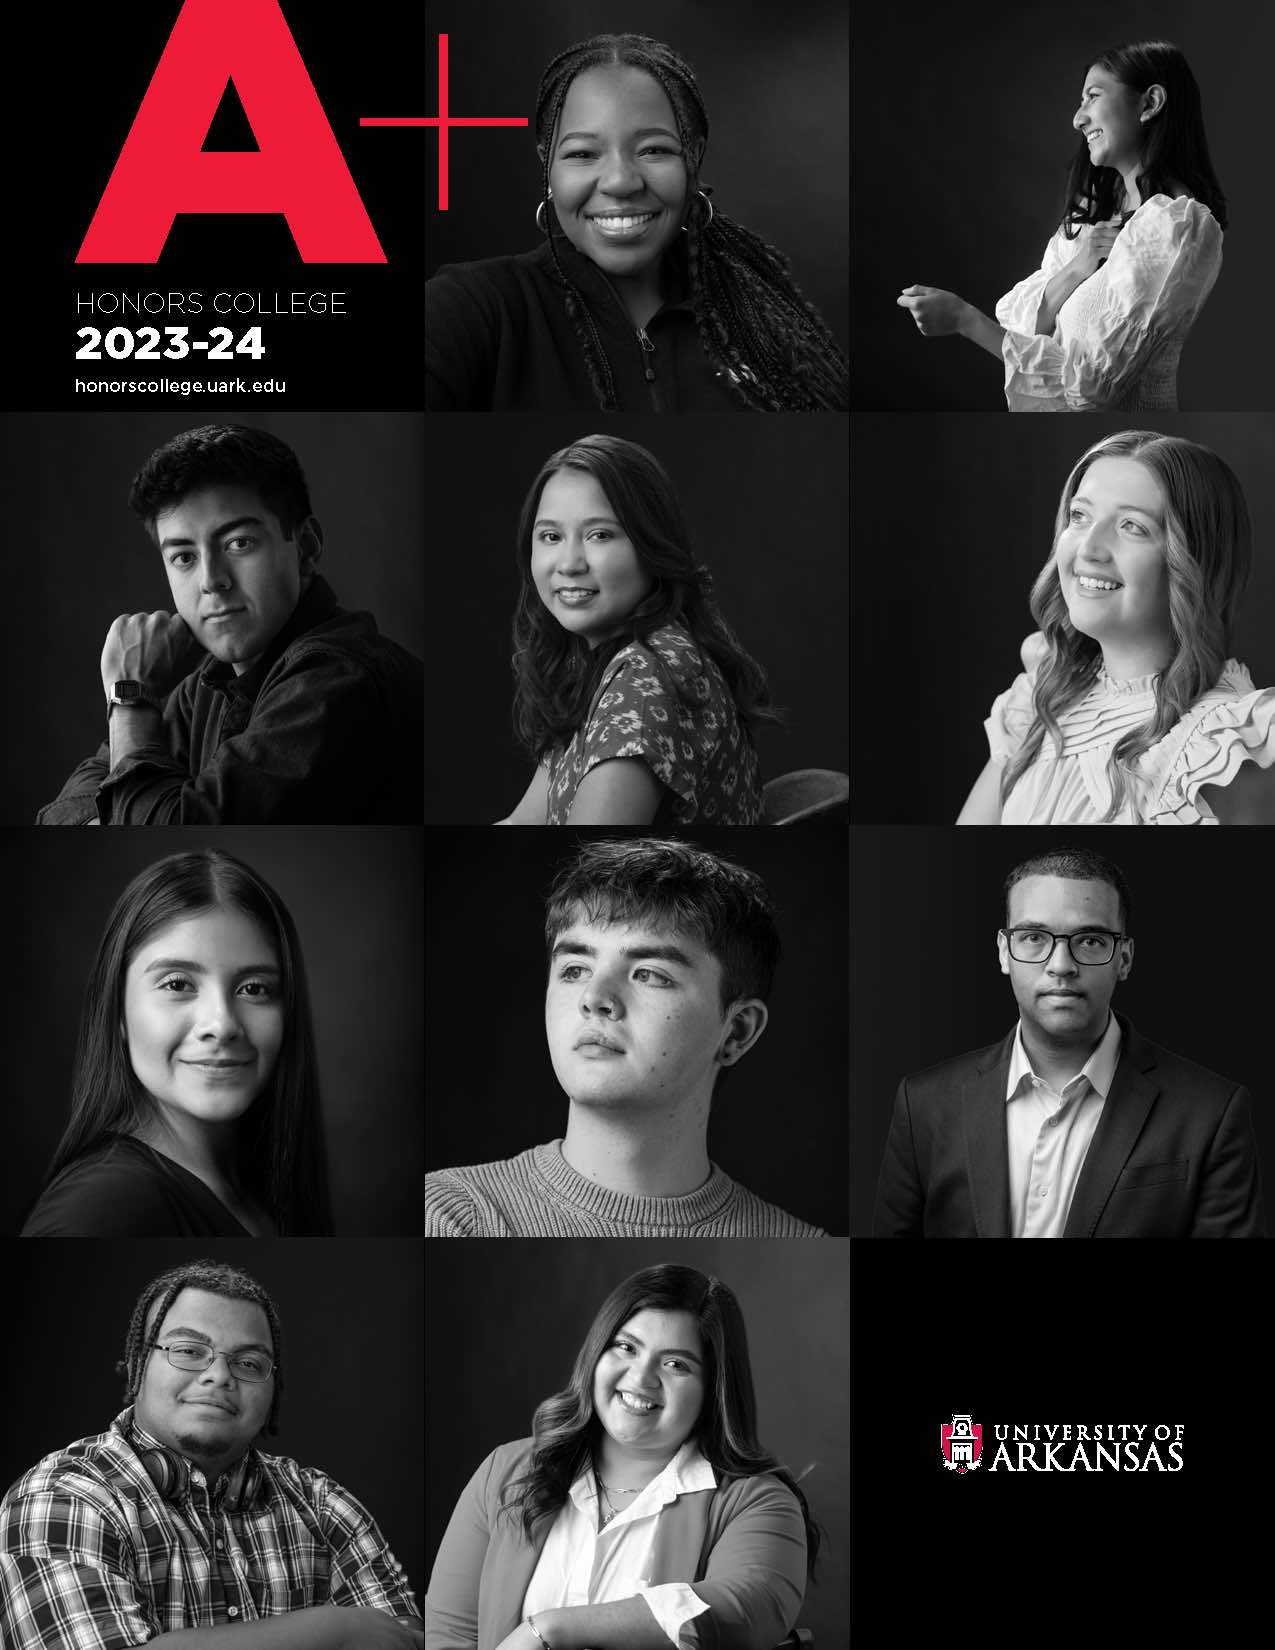 A+ magazine cover shows ten students and alumni in black and white